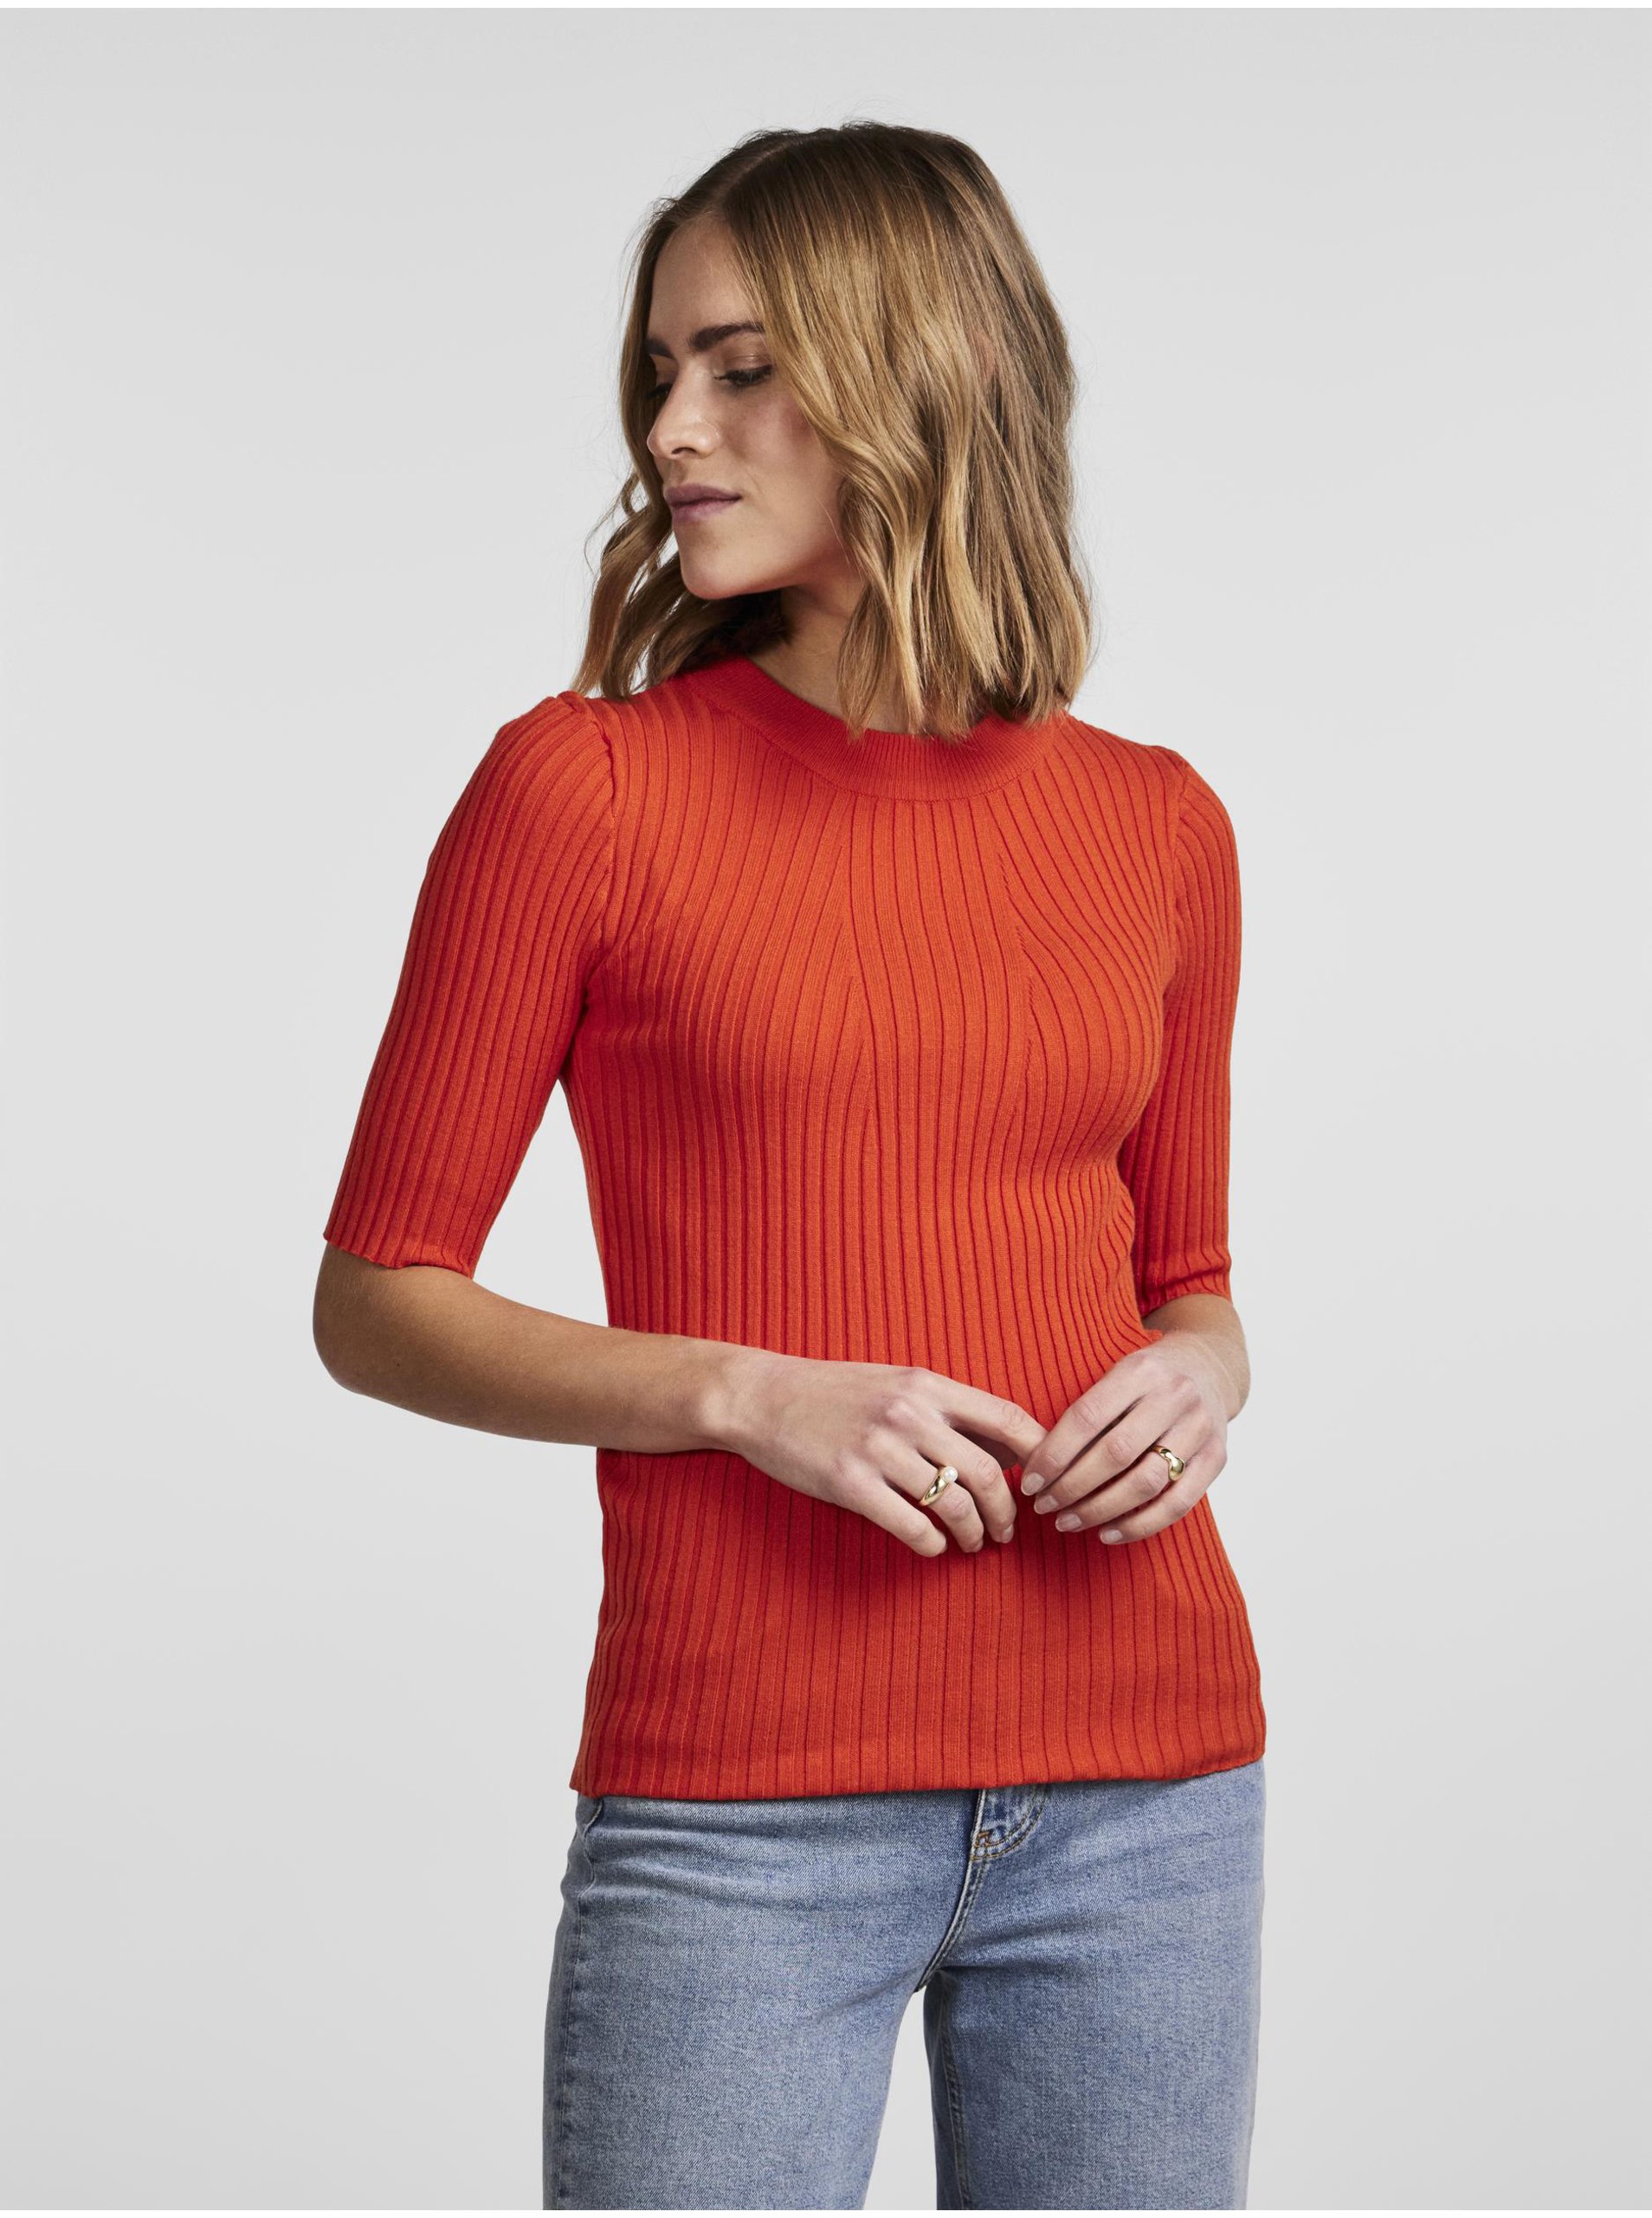 Women's Red Ribbed Light Sweater Pieces Crista - Women